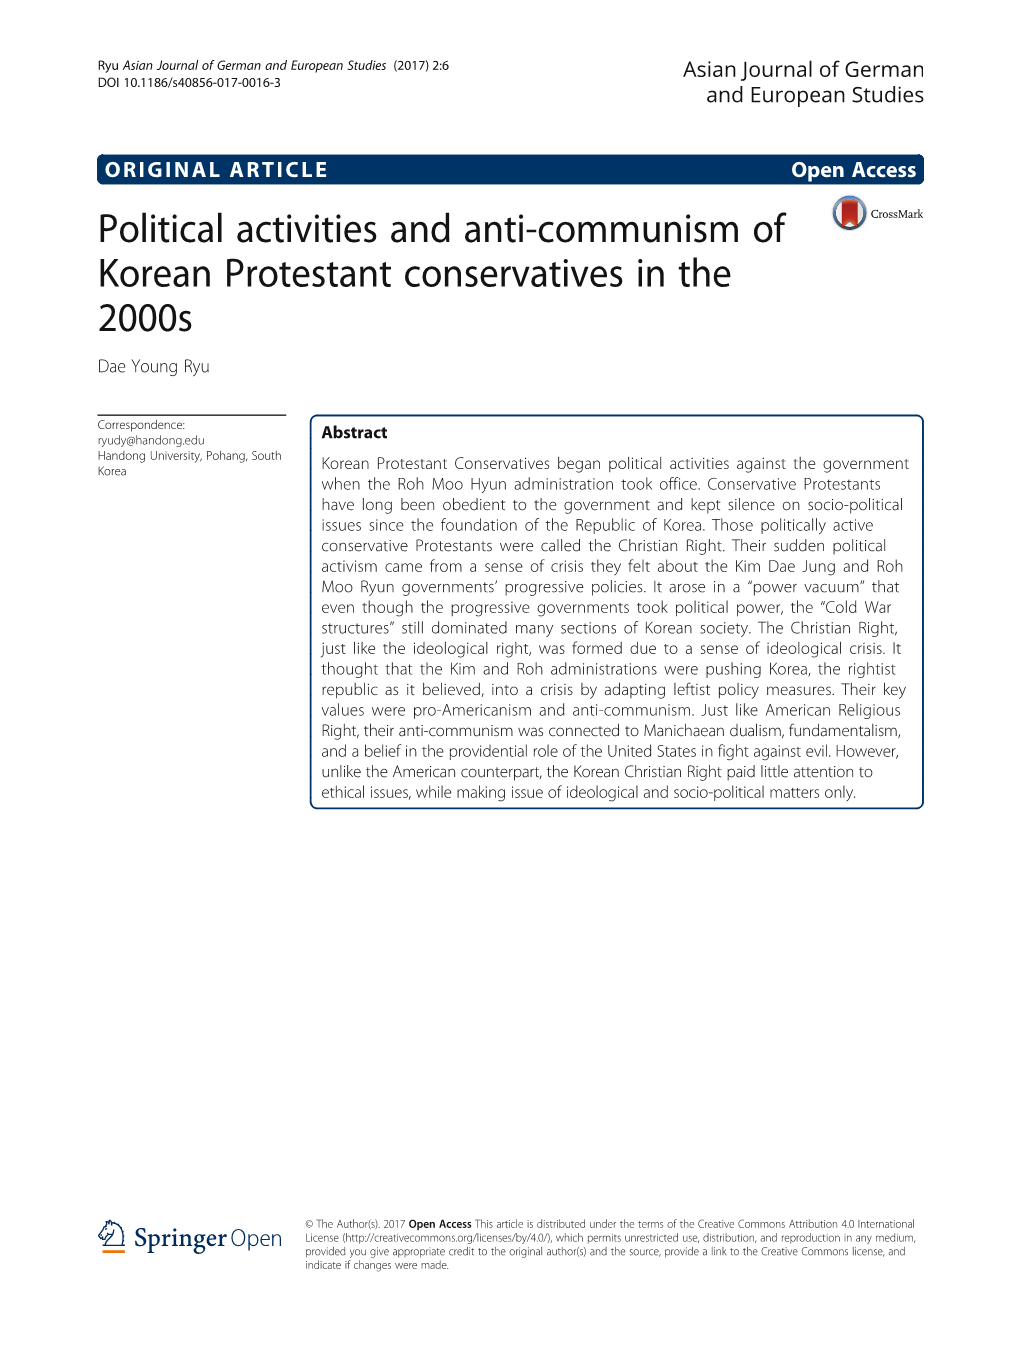 Political Activities and Anti-Communism of Korean Protestant Conservatives in the 2000S Dae Young Ryu